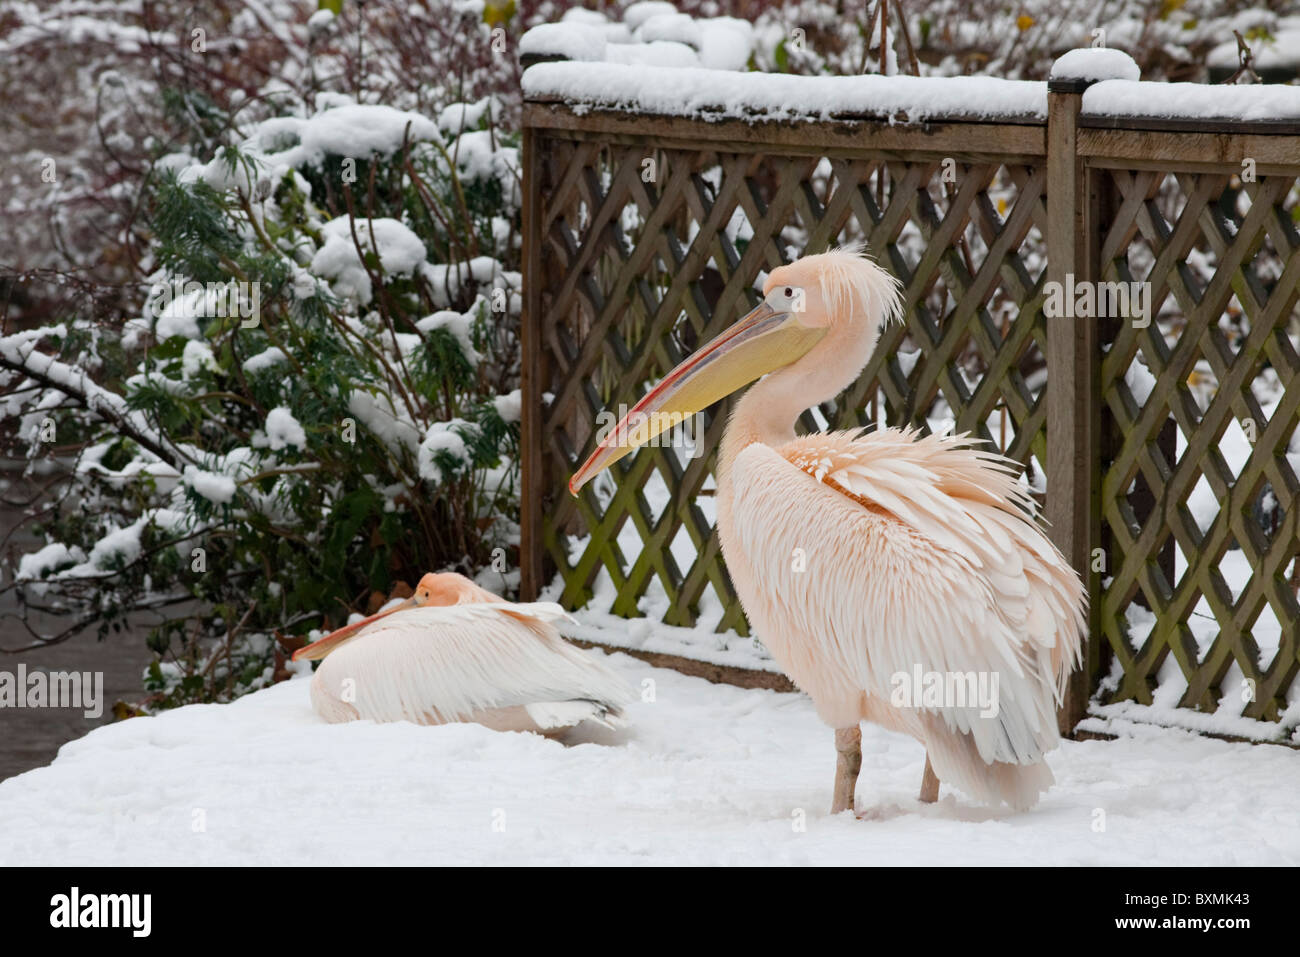 Two Pelicans caught out by an unseasonally heavy snowfall try to keep warm in St James Park, London. Stock Photo